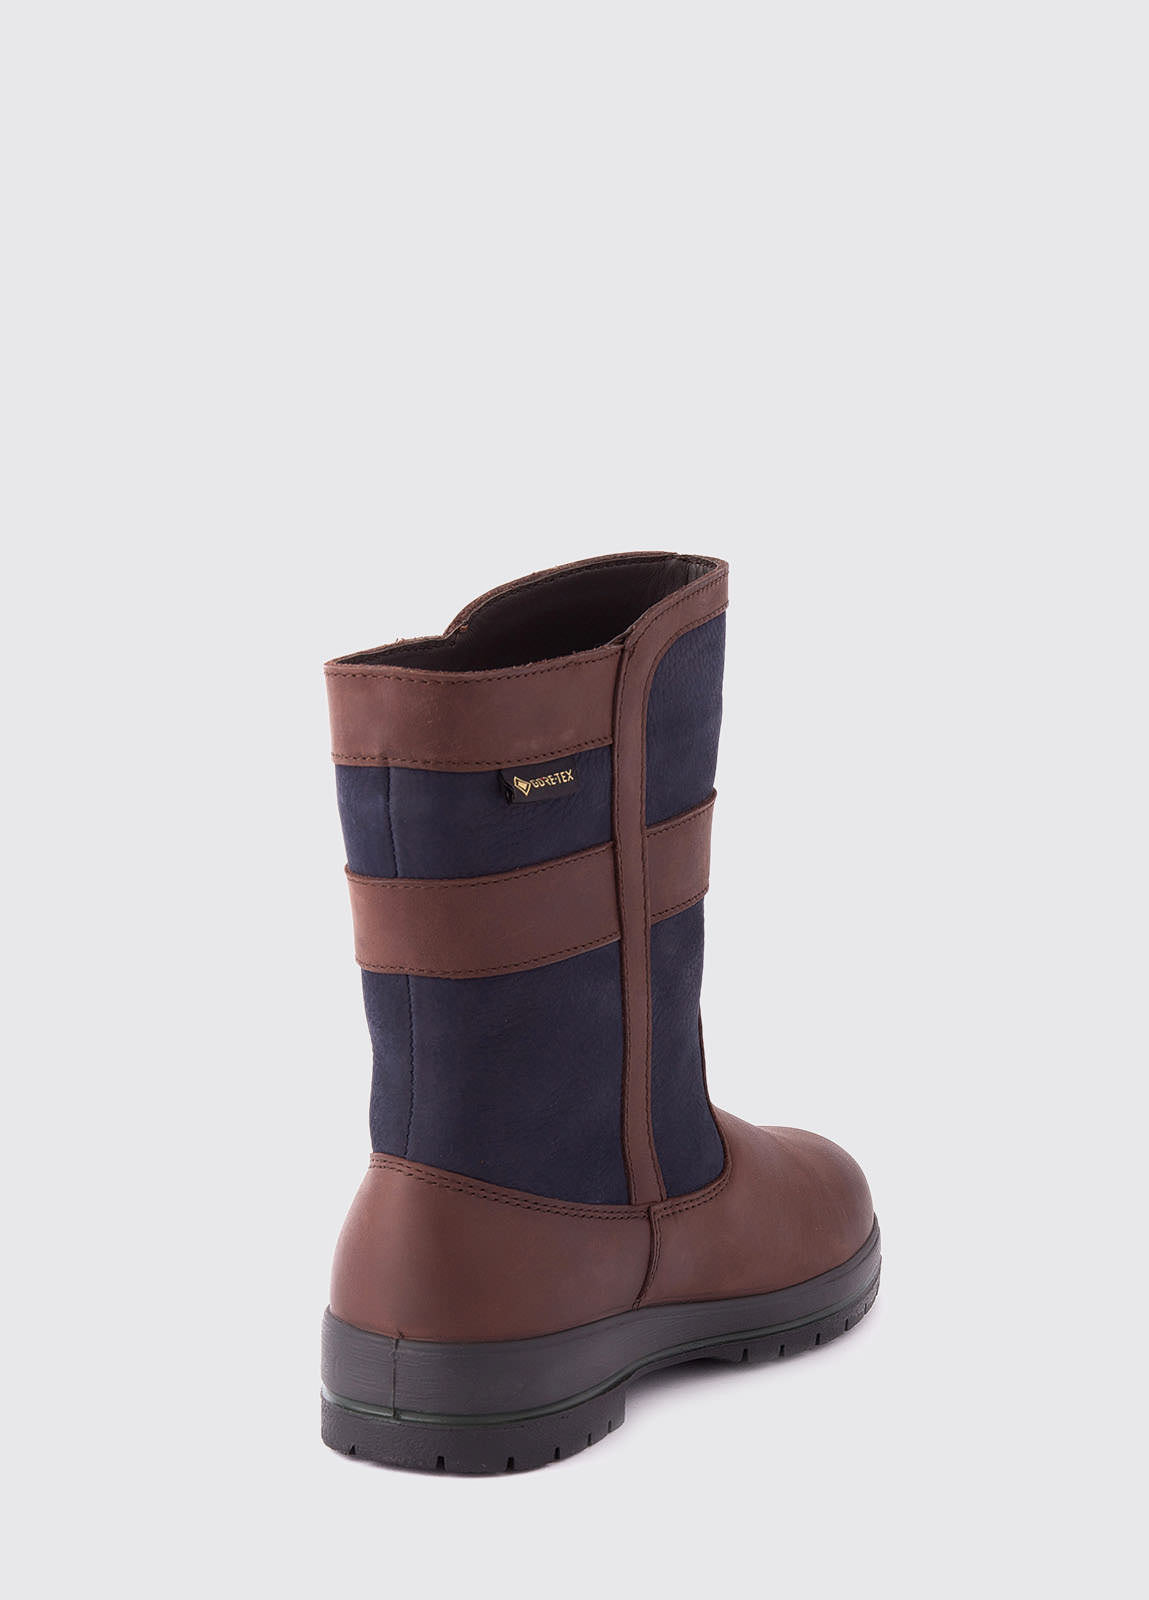 Roscommon Country Boot - Navy/Brown